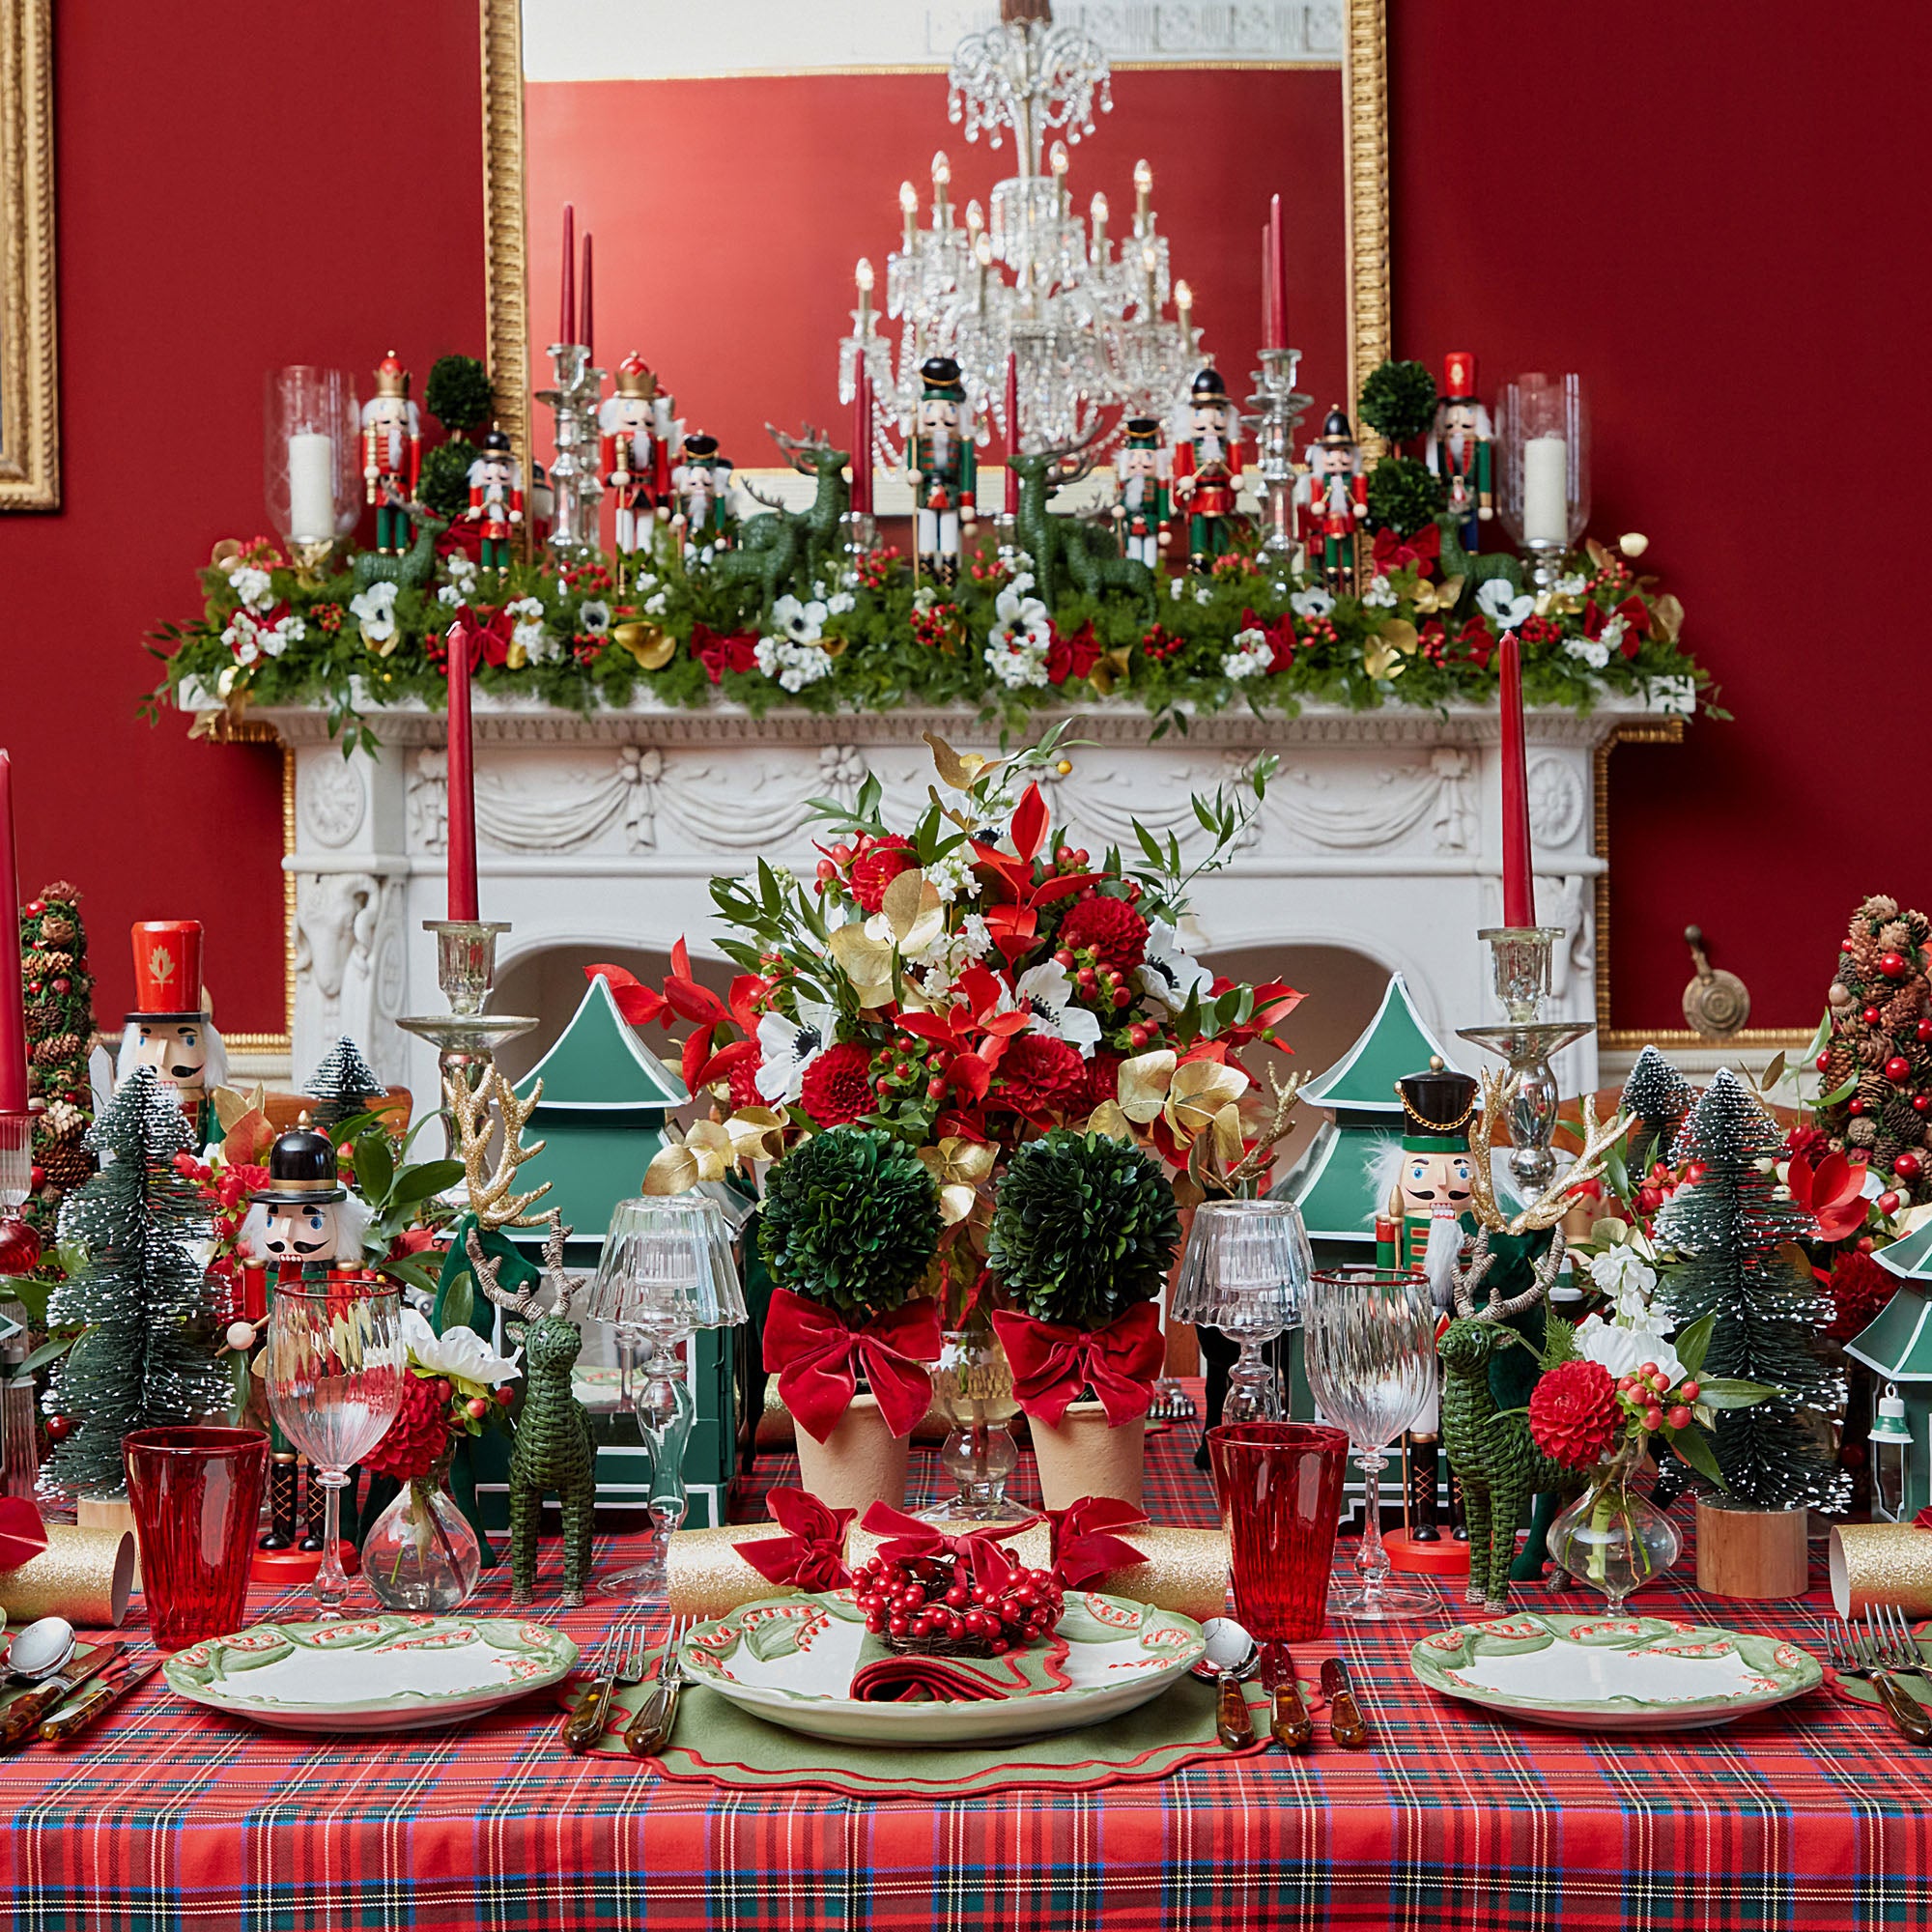 Easy Christmas Candle Displays to Make This Year